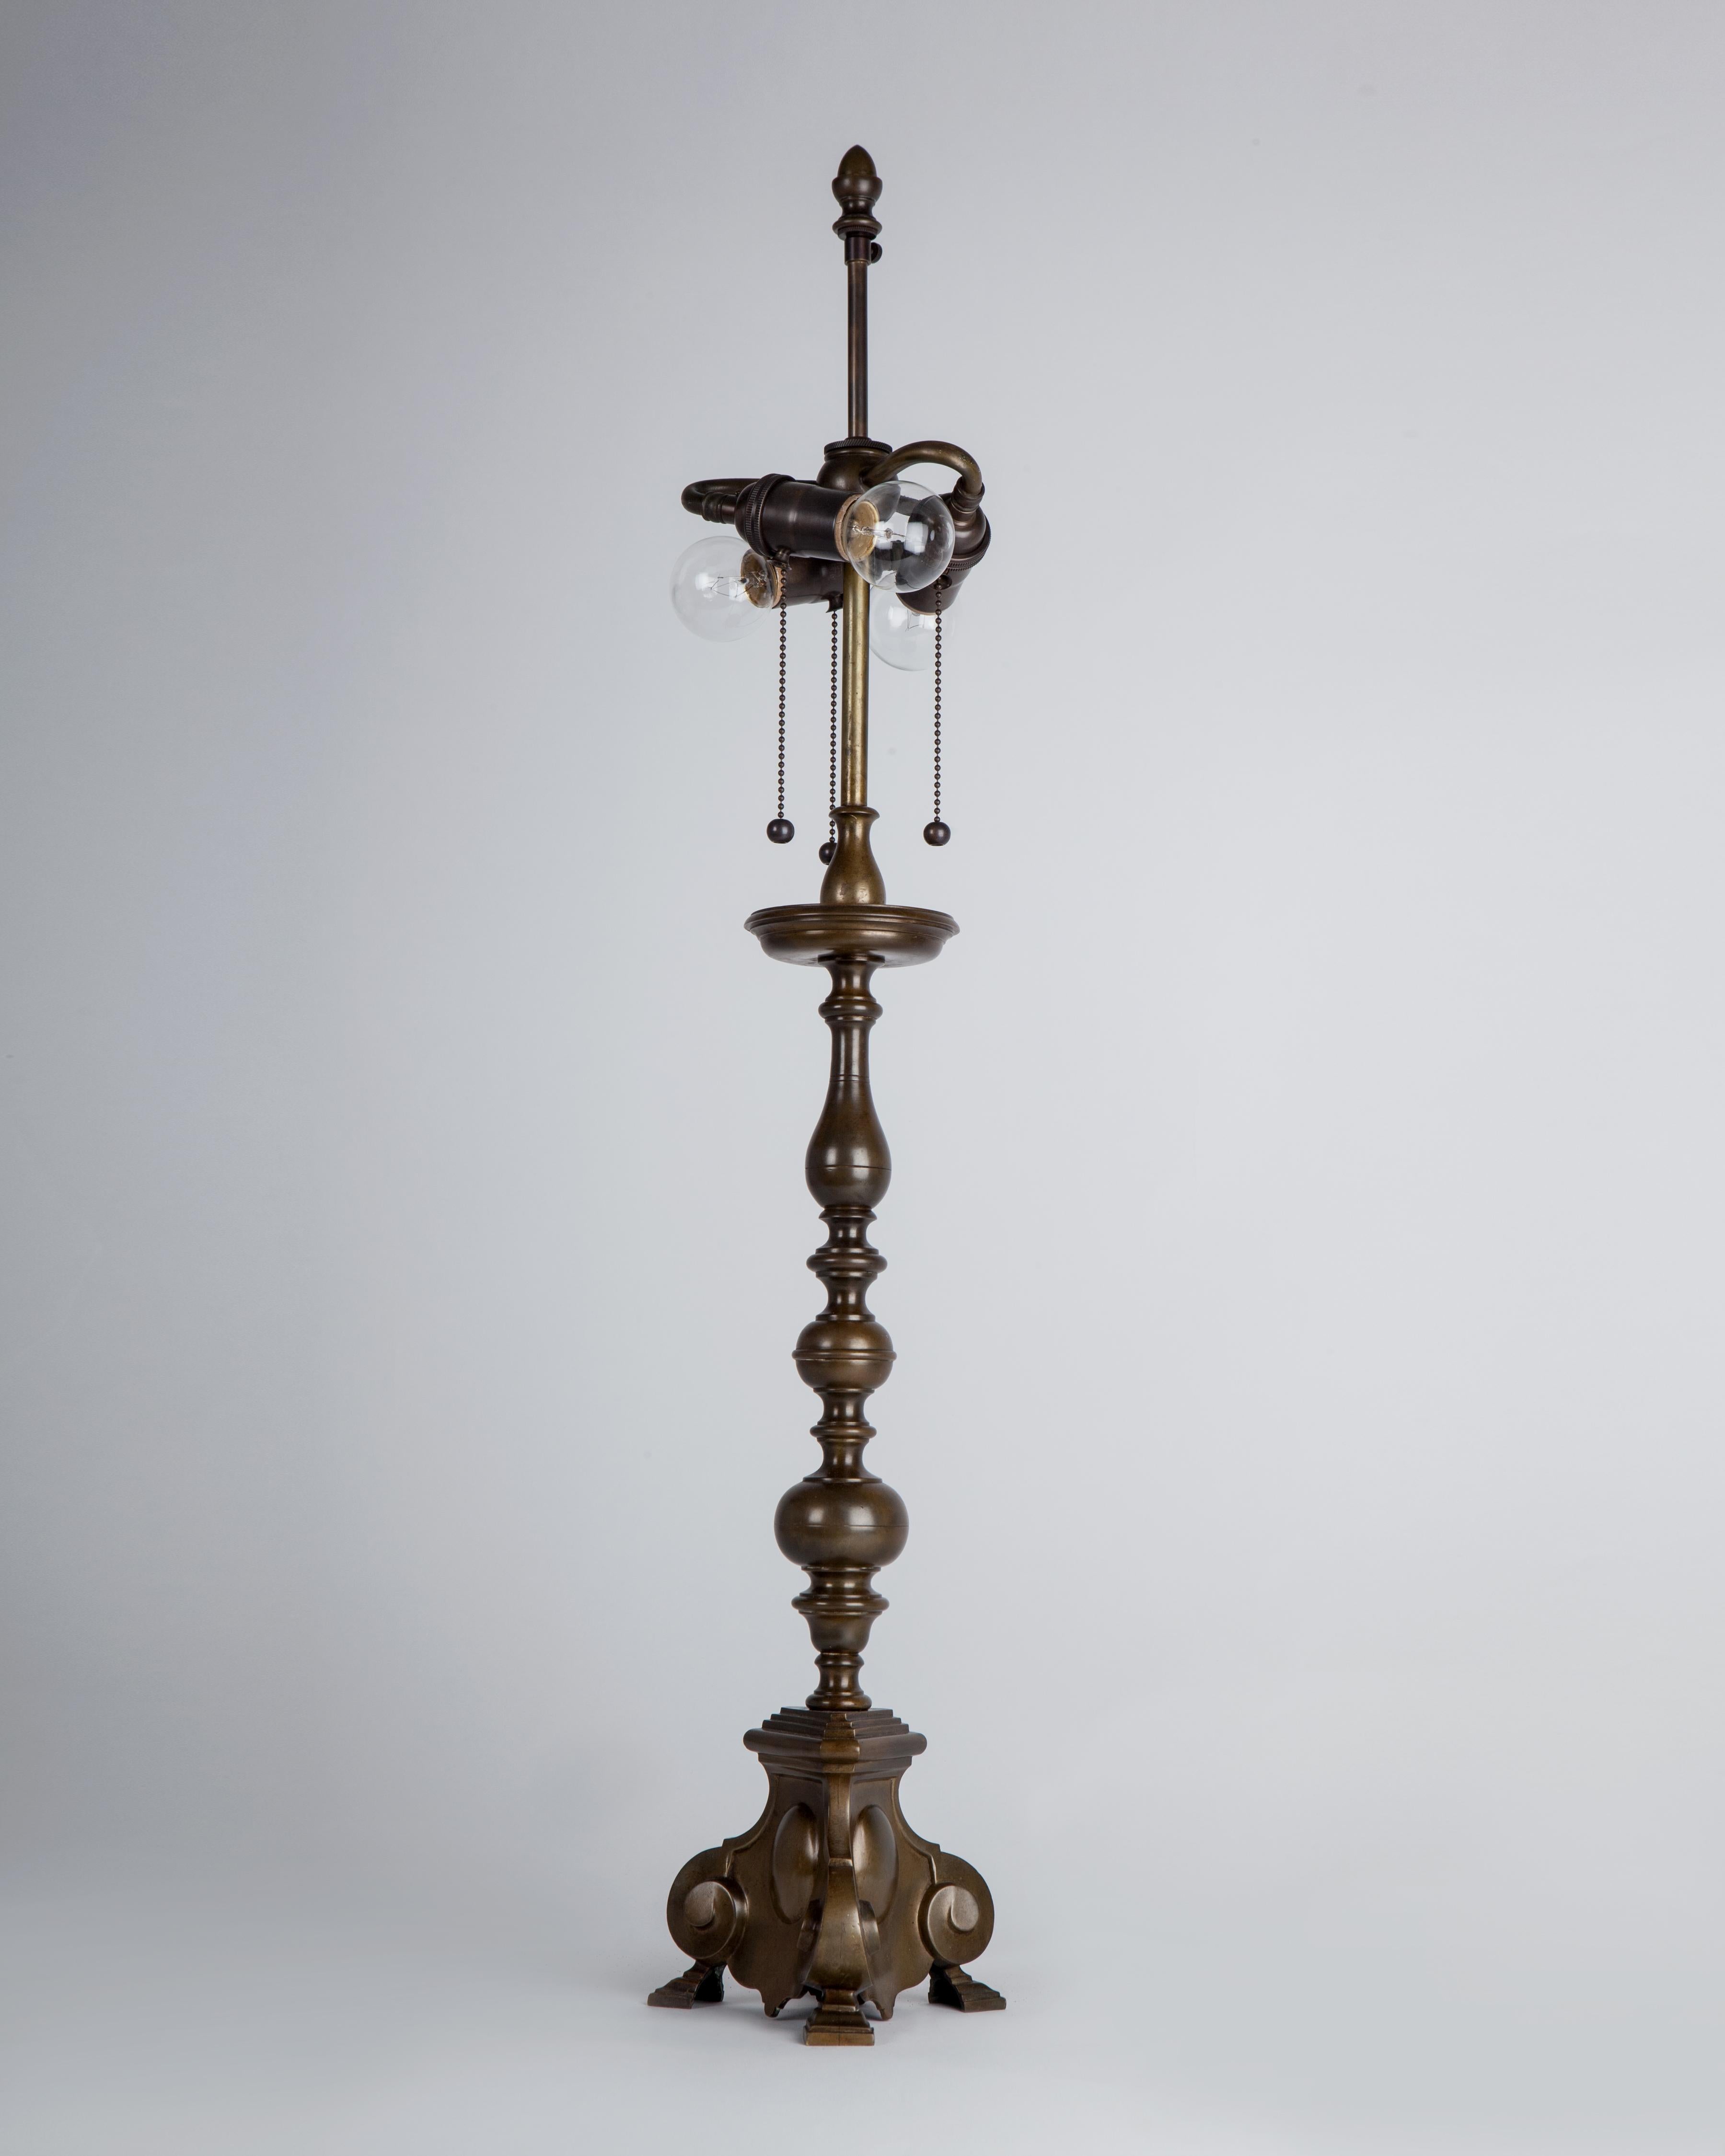 Baroque Antique Bronze Lamp with Baluster Form Body by E. F. Caldwell, Circa 1920s For Sale